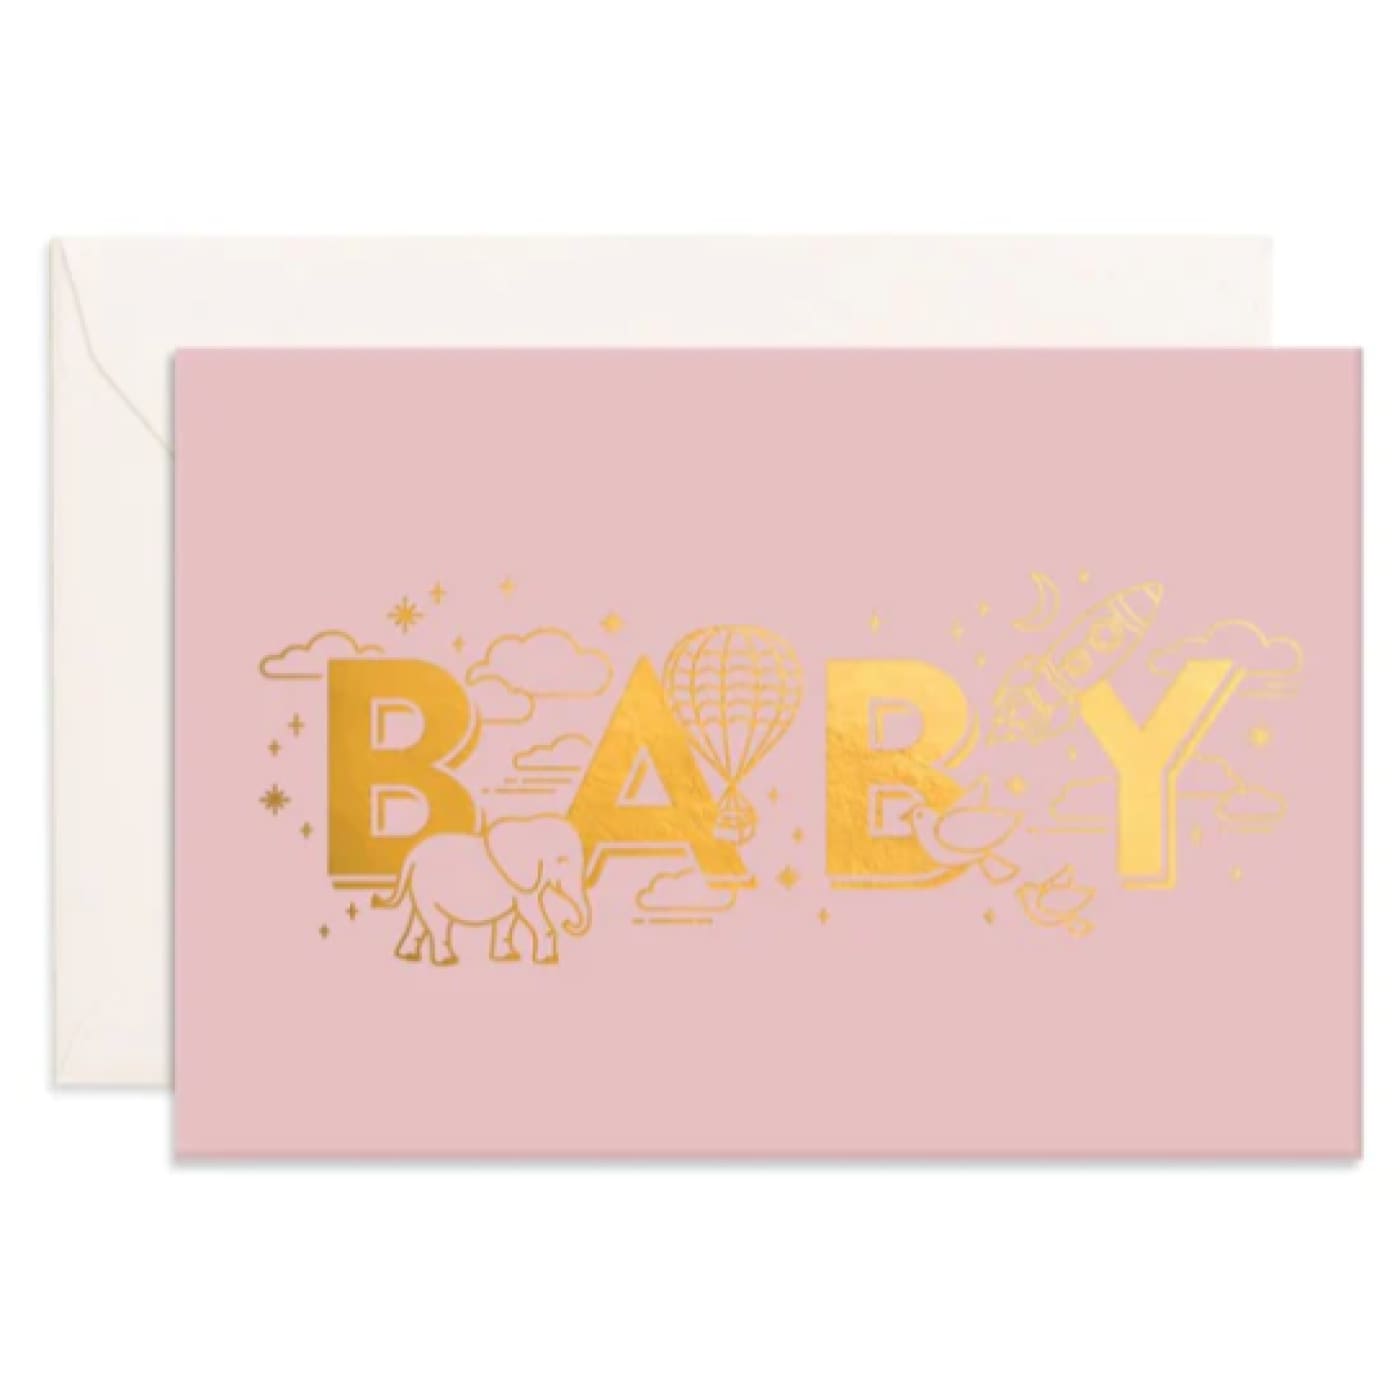 Fox & Fallow Baby Universe Mini Greeting Card - Dusty Rose - GIFTWARE - CARDS